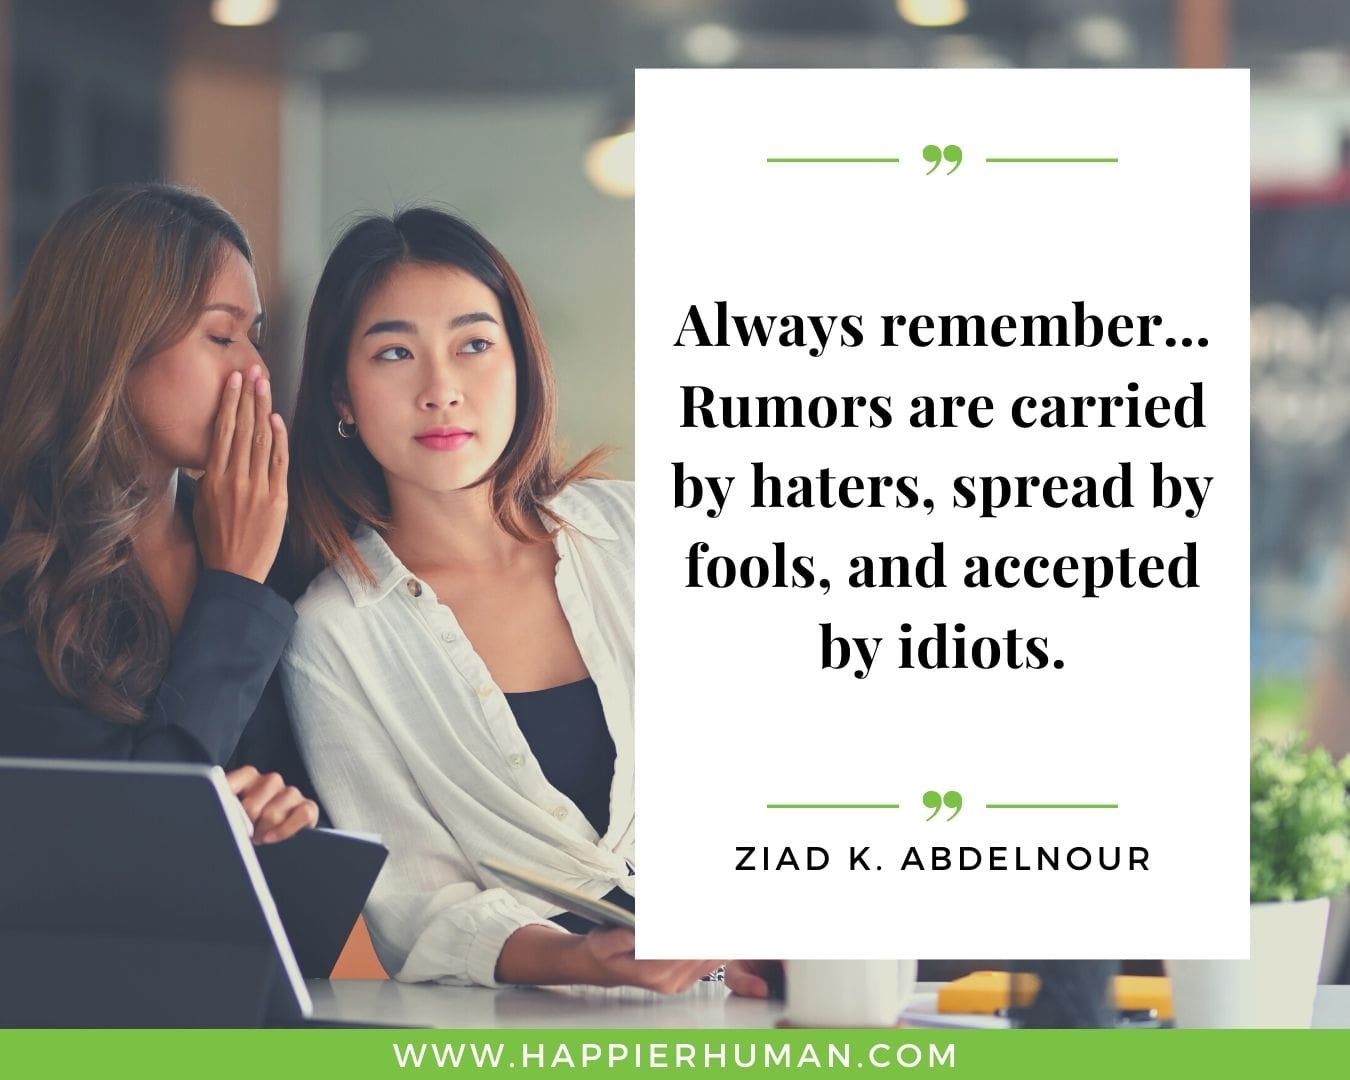 Haters Quotes - “Always remember… Rumors are carried by haters, spread by fools, and accepted by idiots.” - Ziad K. Abdelnour